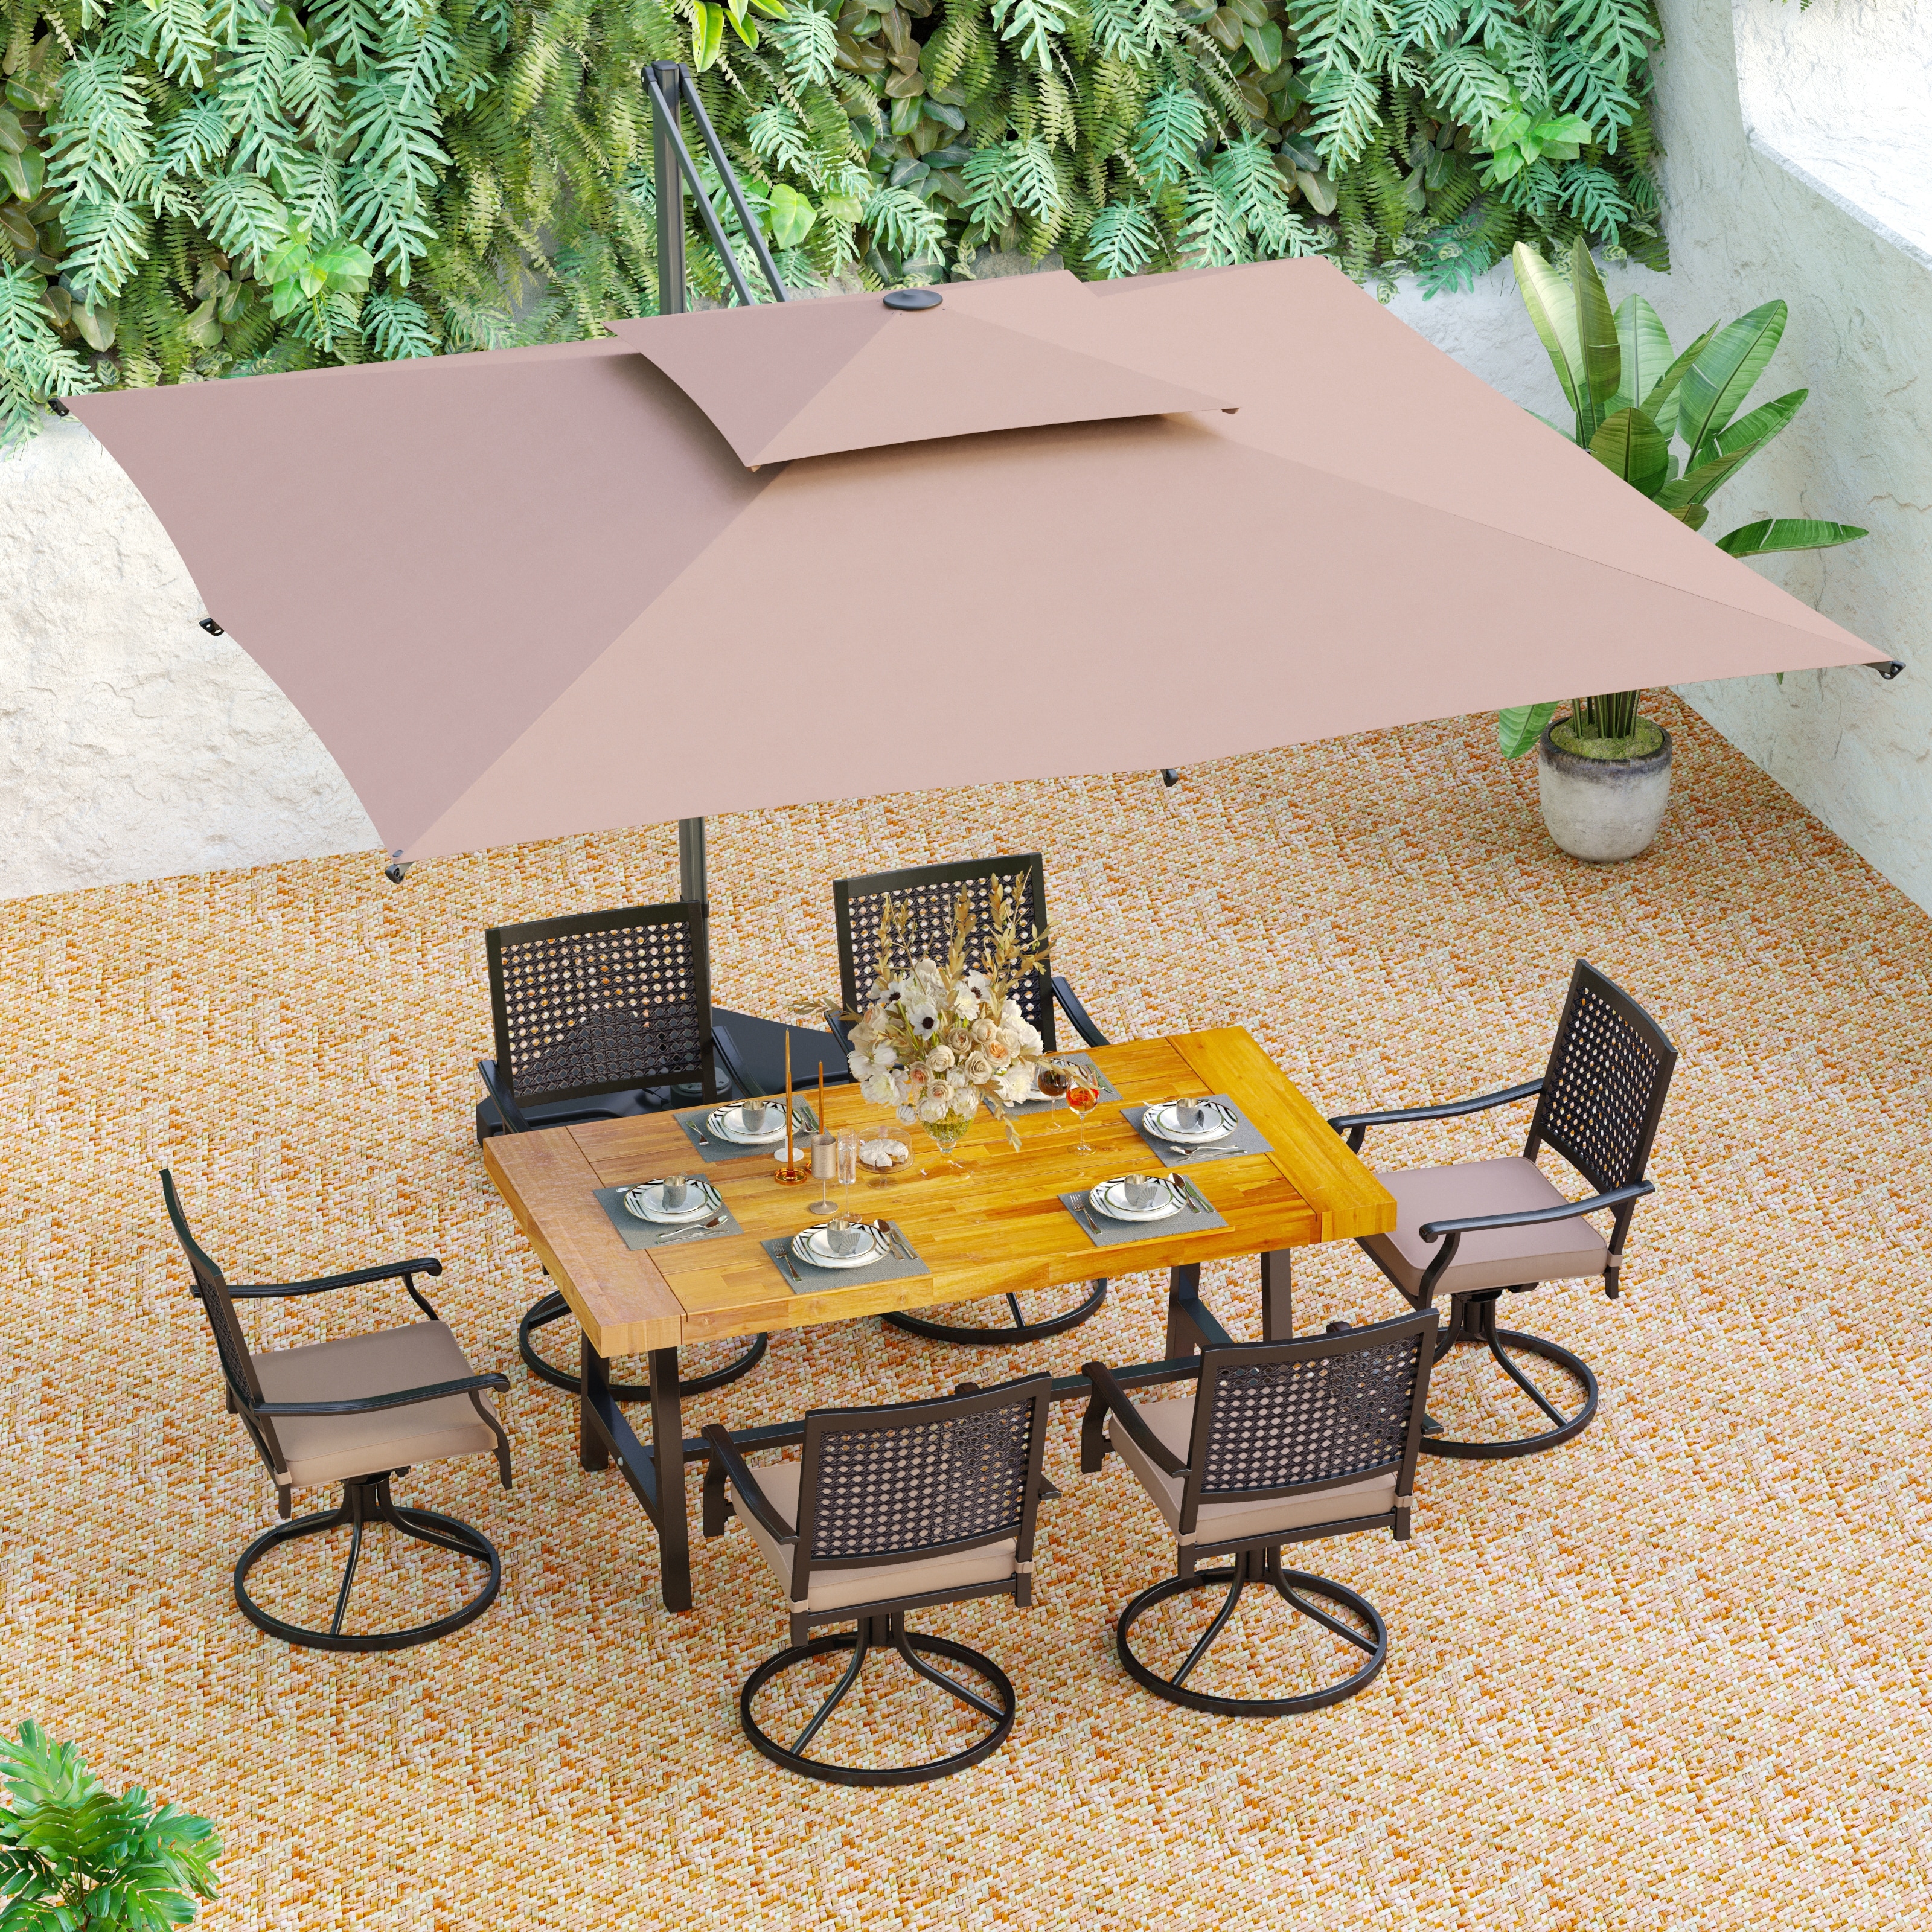 8-piece Patio Dining Sets  6 Stackable Or Swivel Chair  1 Acacia Wood Table And 1 10ft Offset Umbrella